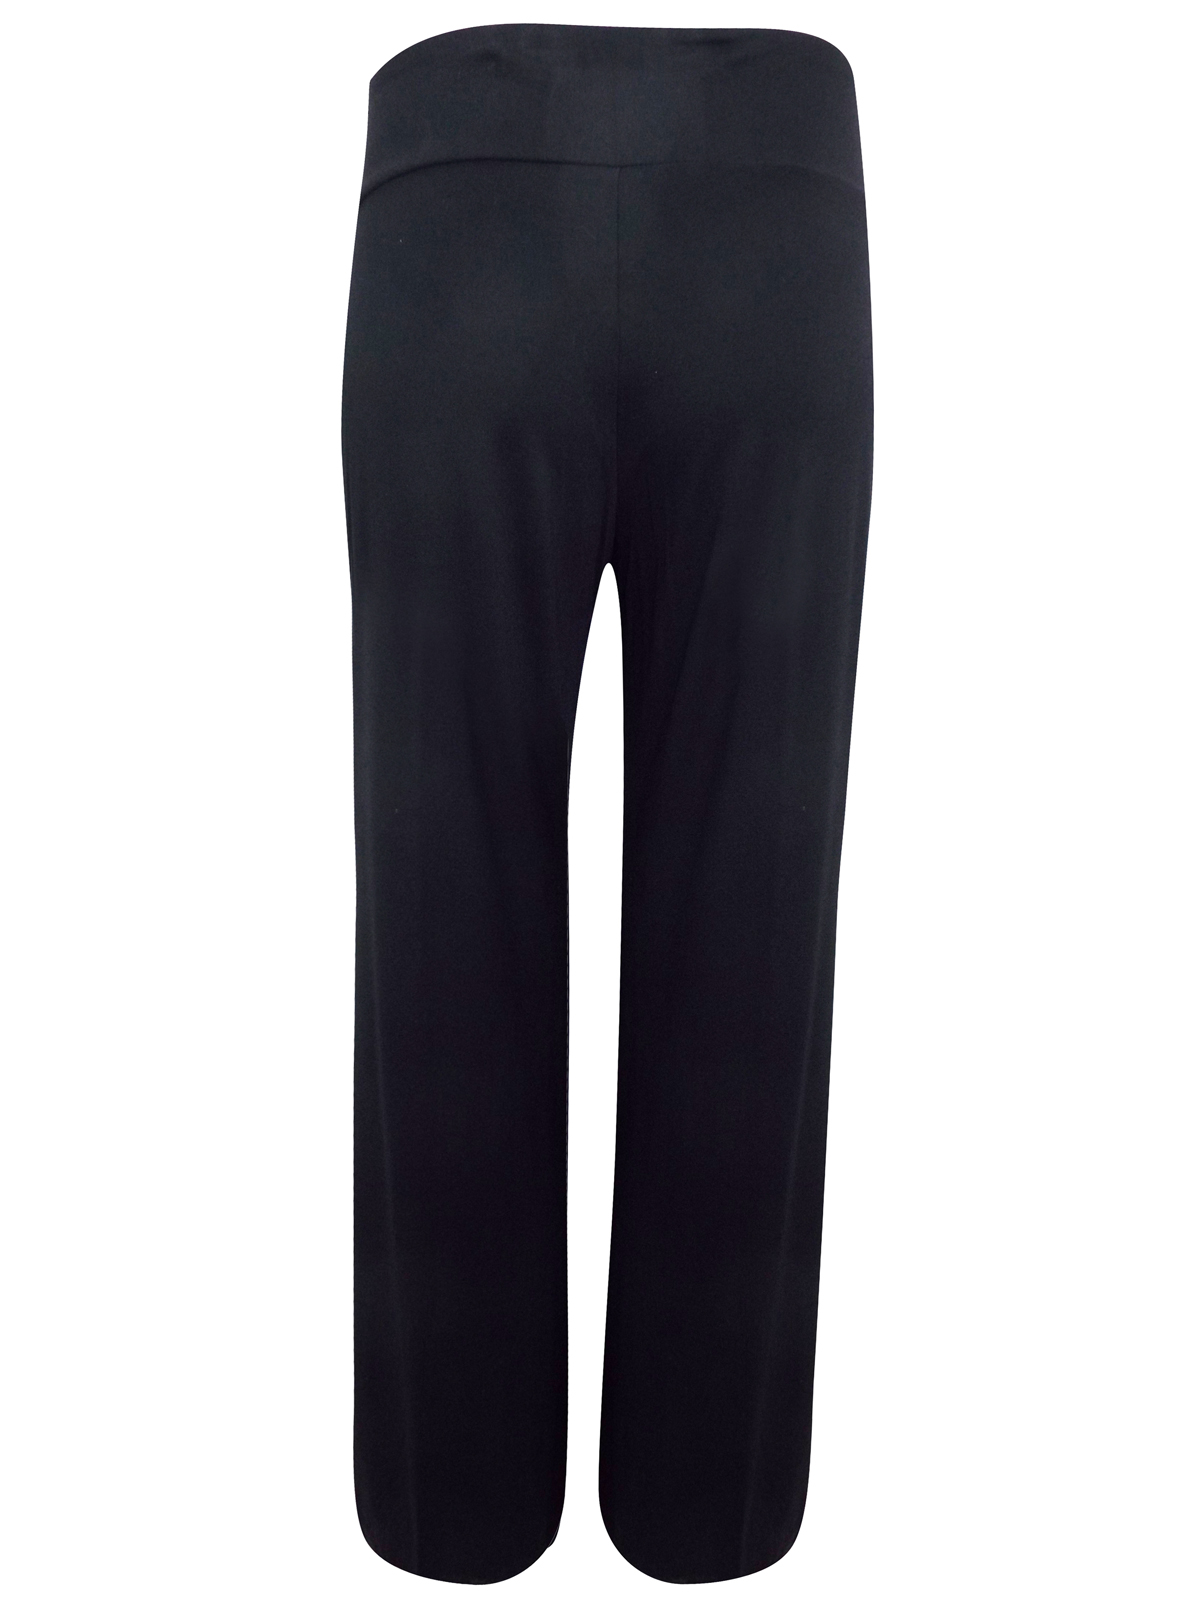 Marks and Spencer - - M&5 BLACK Full Length Jersey Yoga Trousers - Size ...